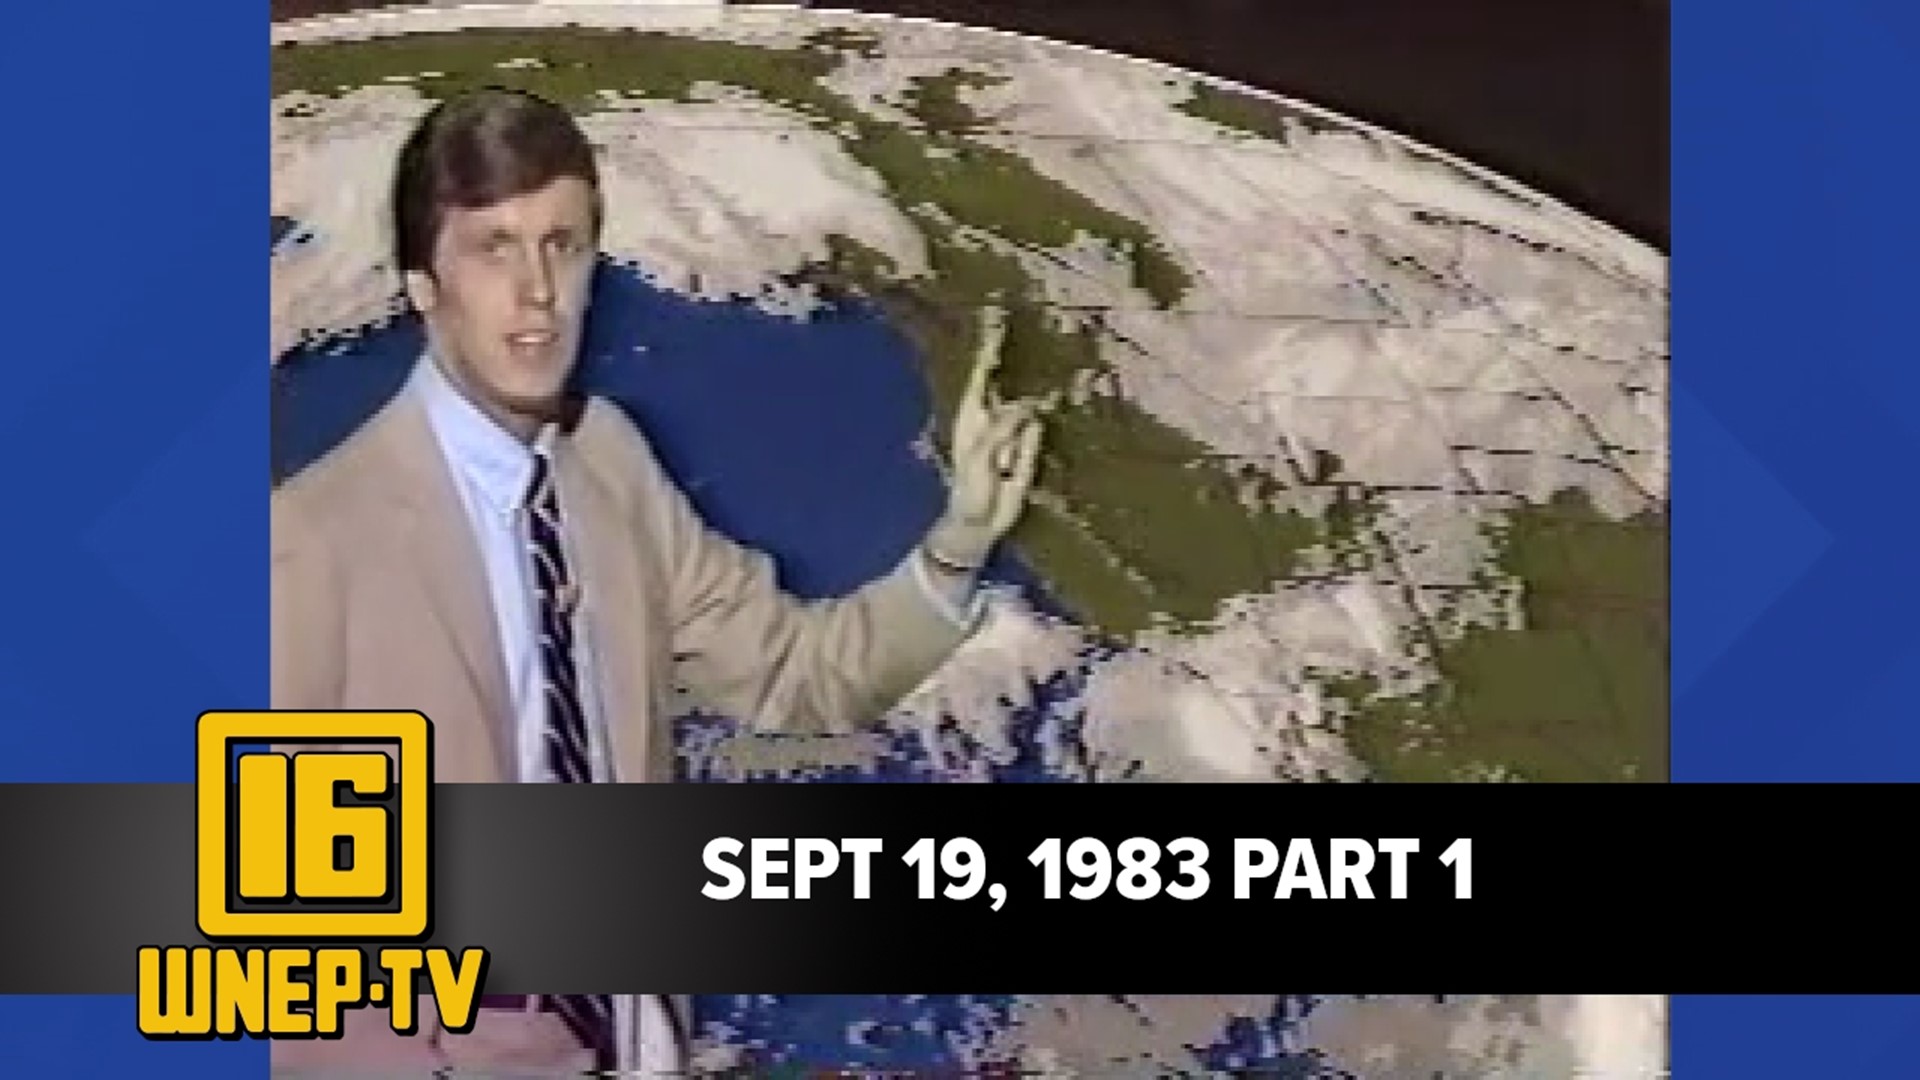 Watch Nolan Johannes with curated stories from September 19, 1983.